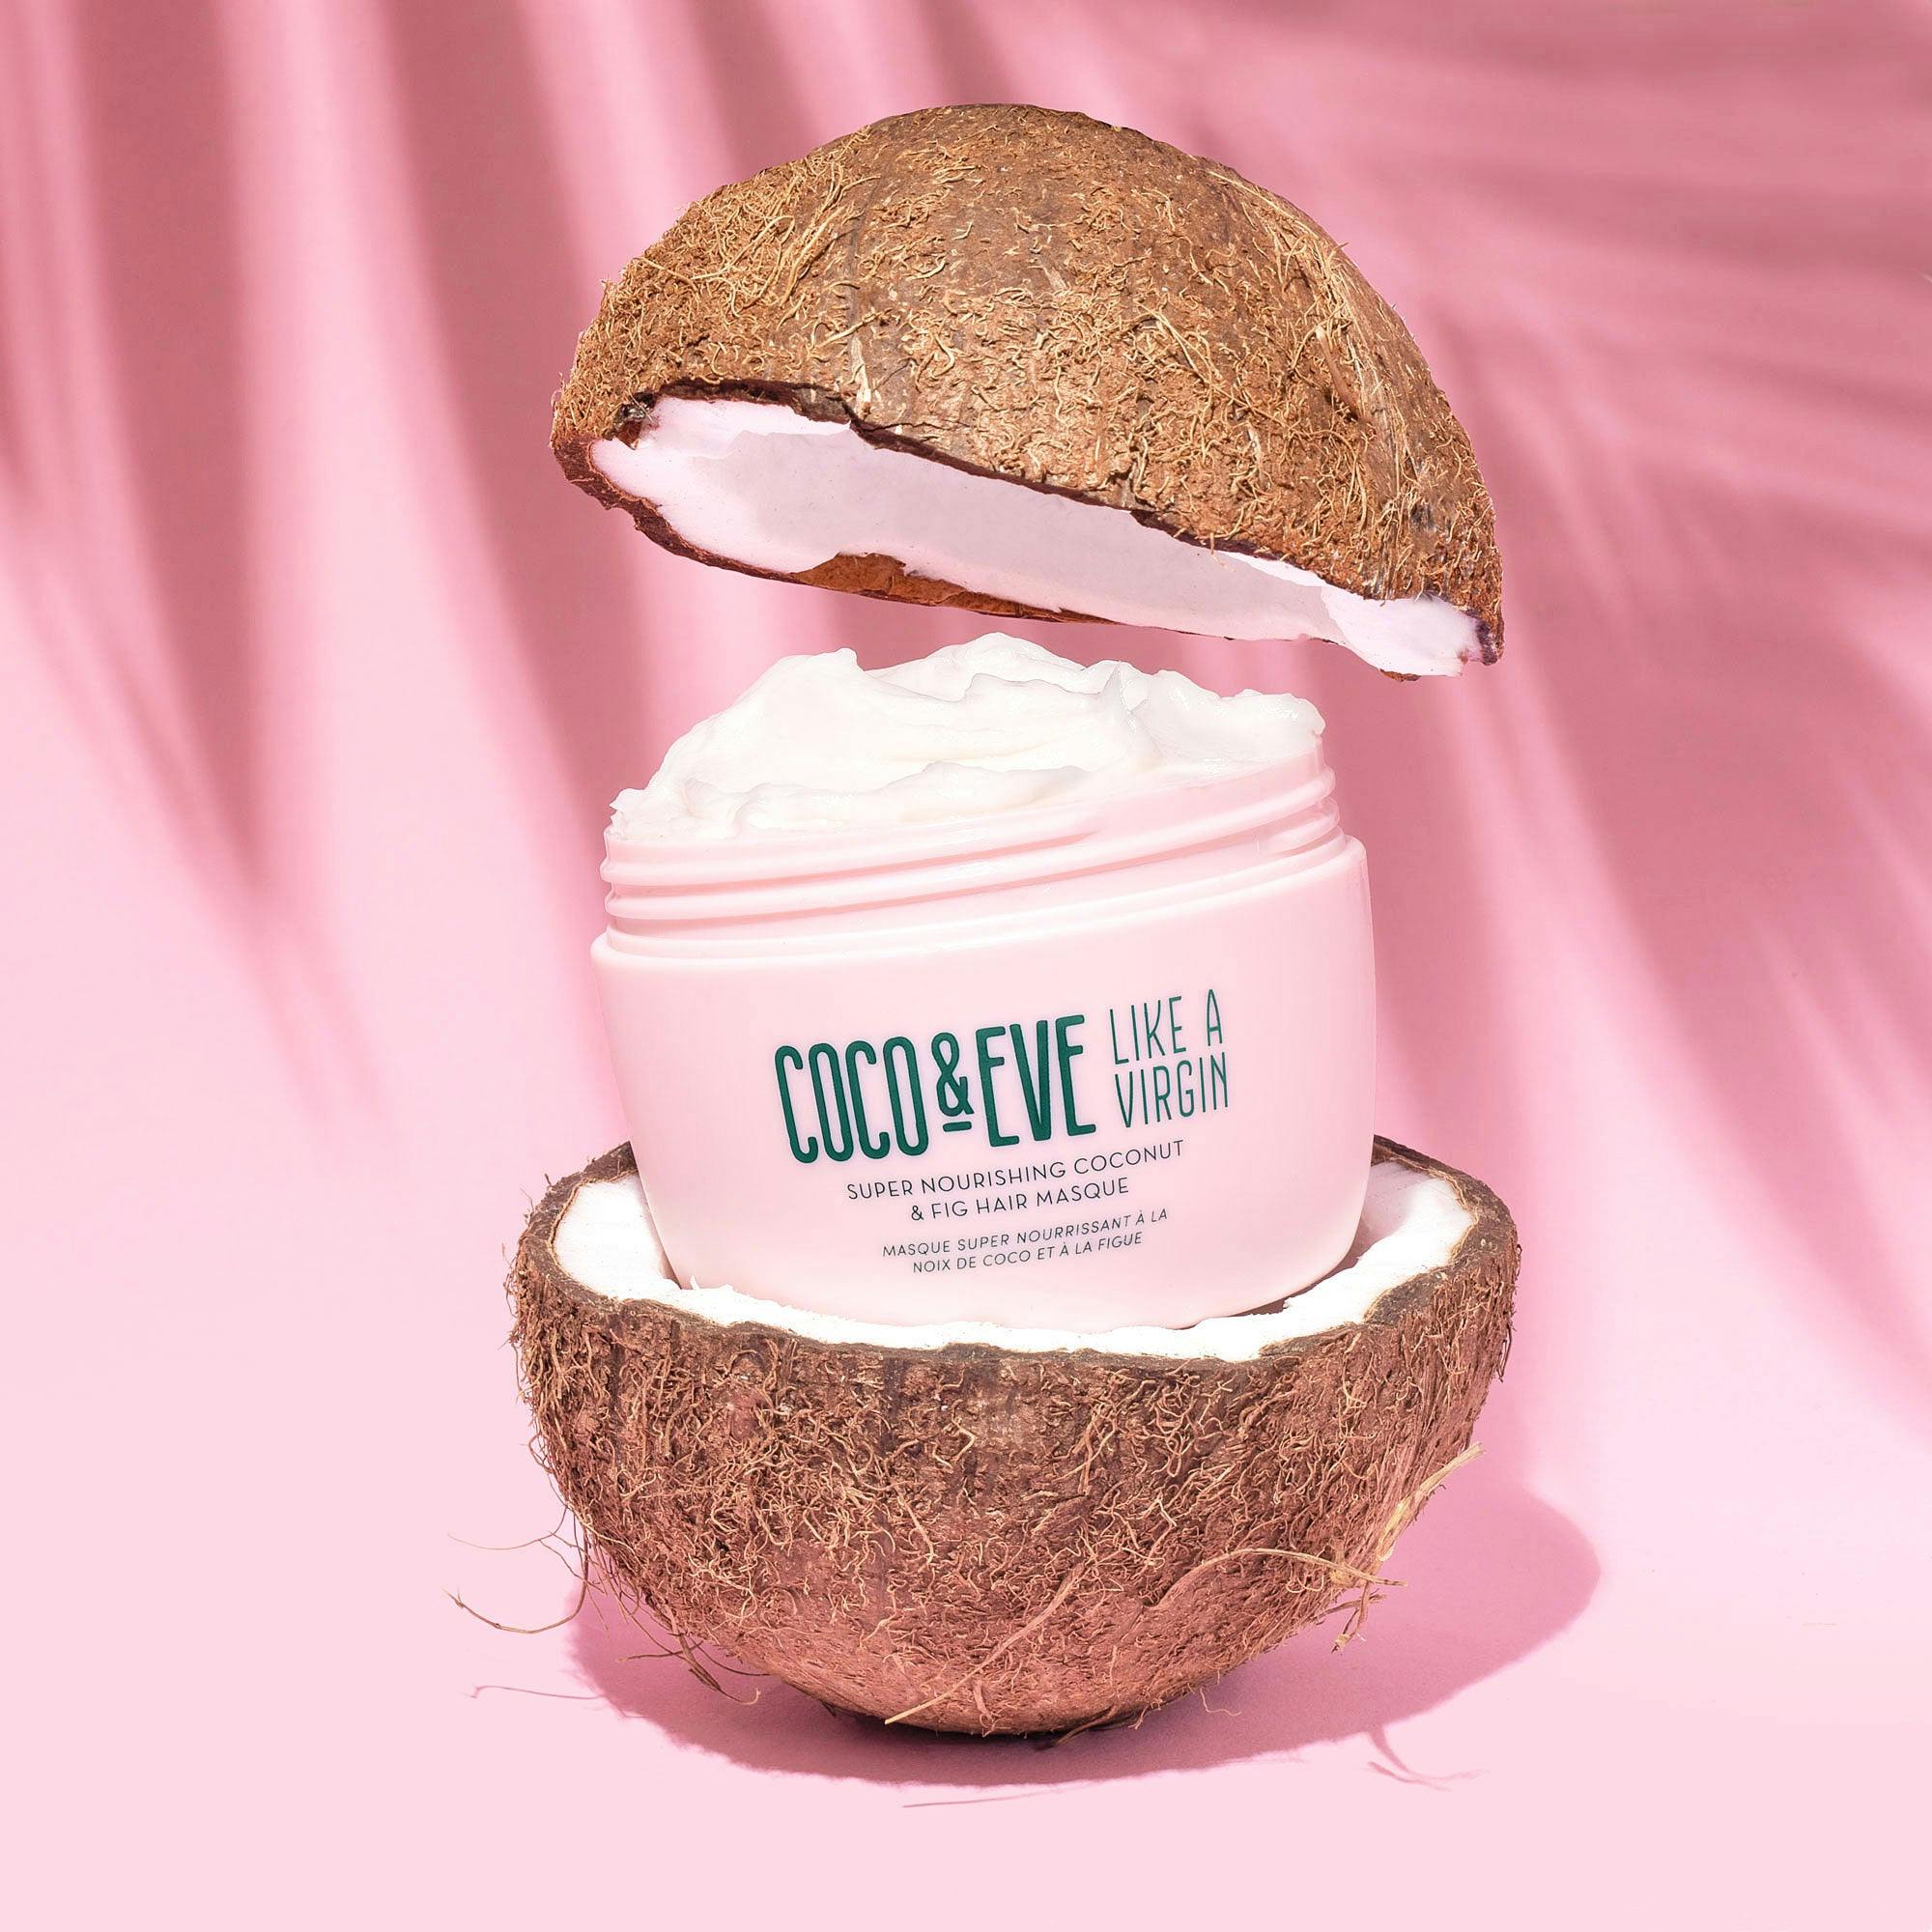 Coco & Eve Like A Virgin Super Nourishing Coconut & Fig Hair Masque 212ml with Tangle Tamer